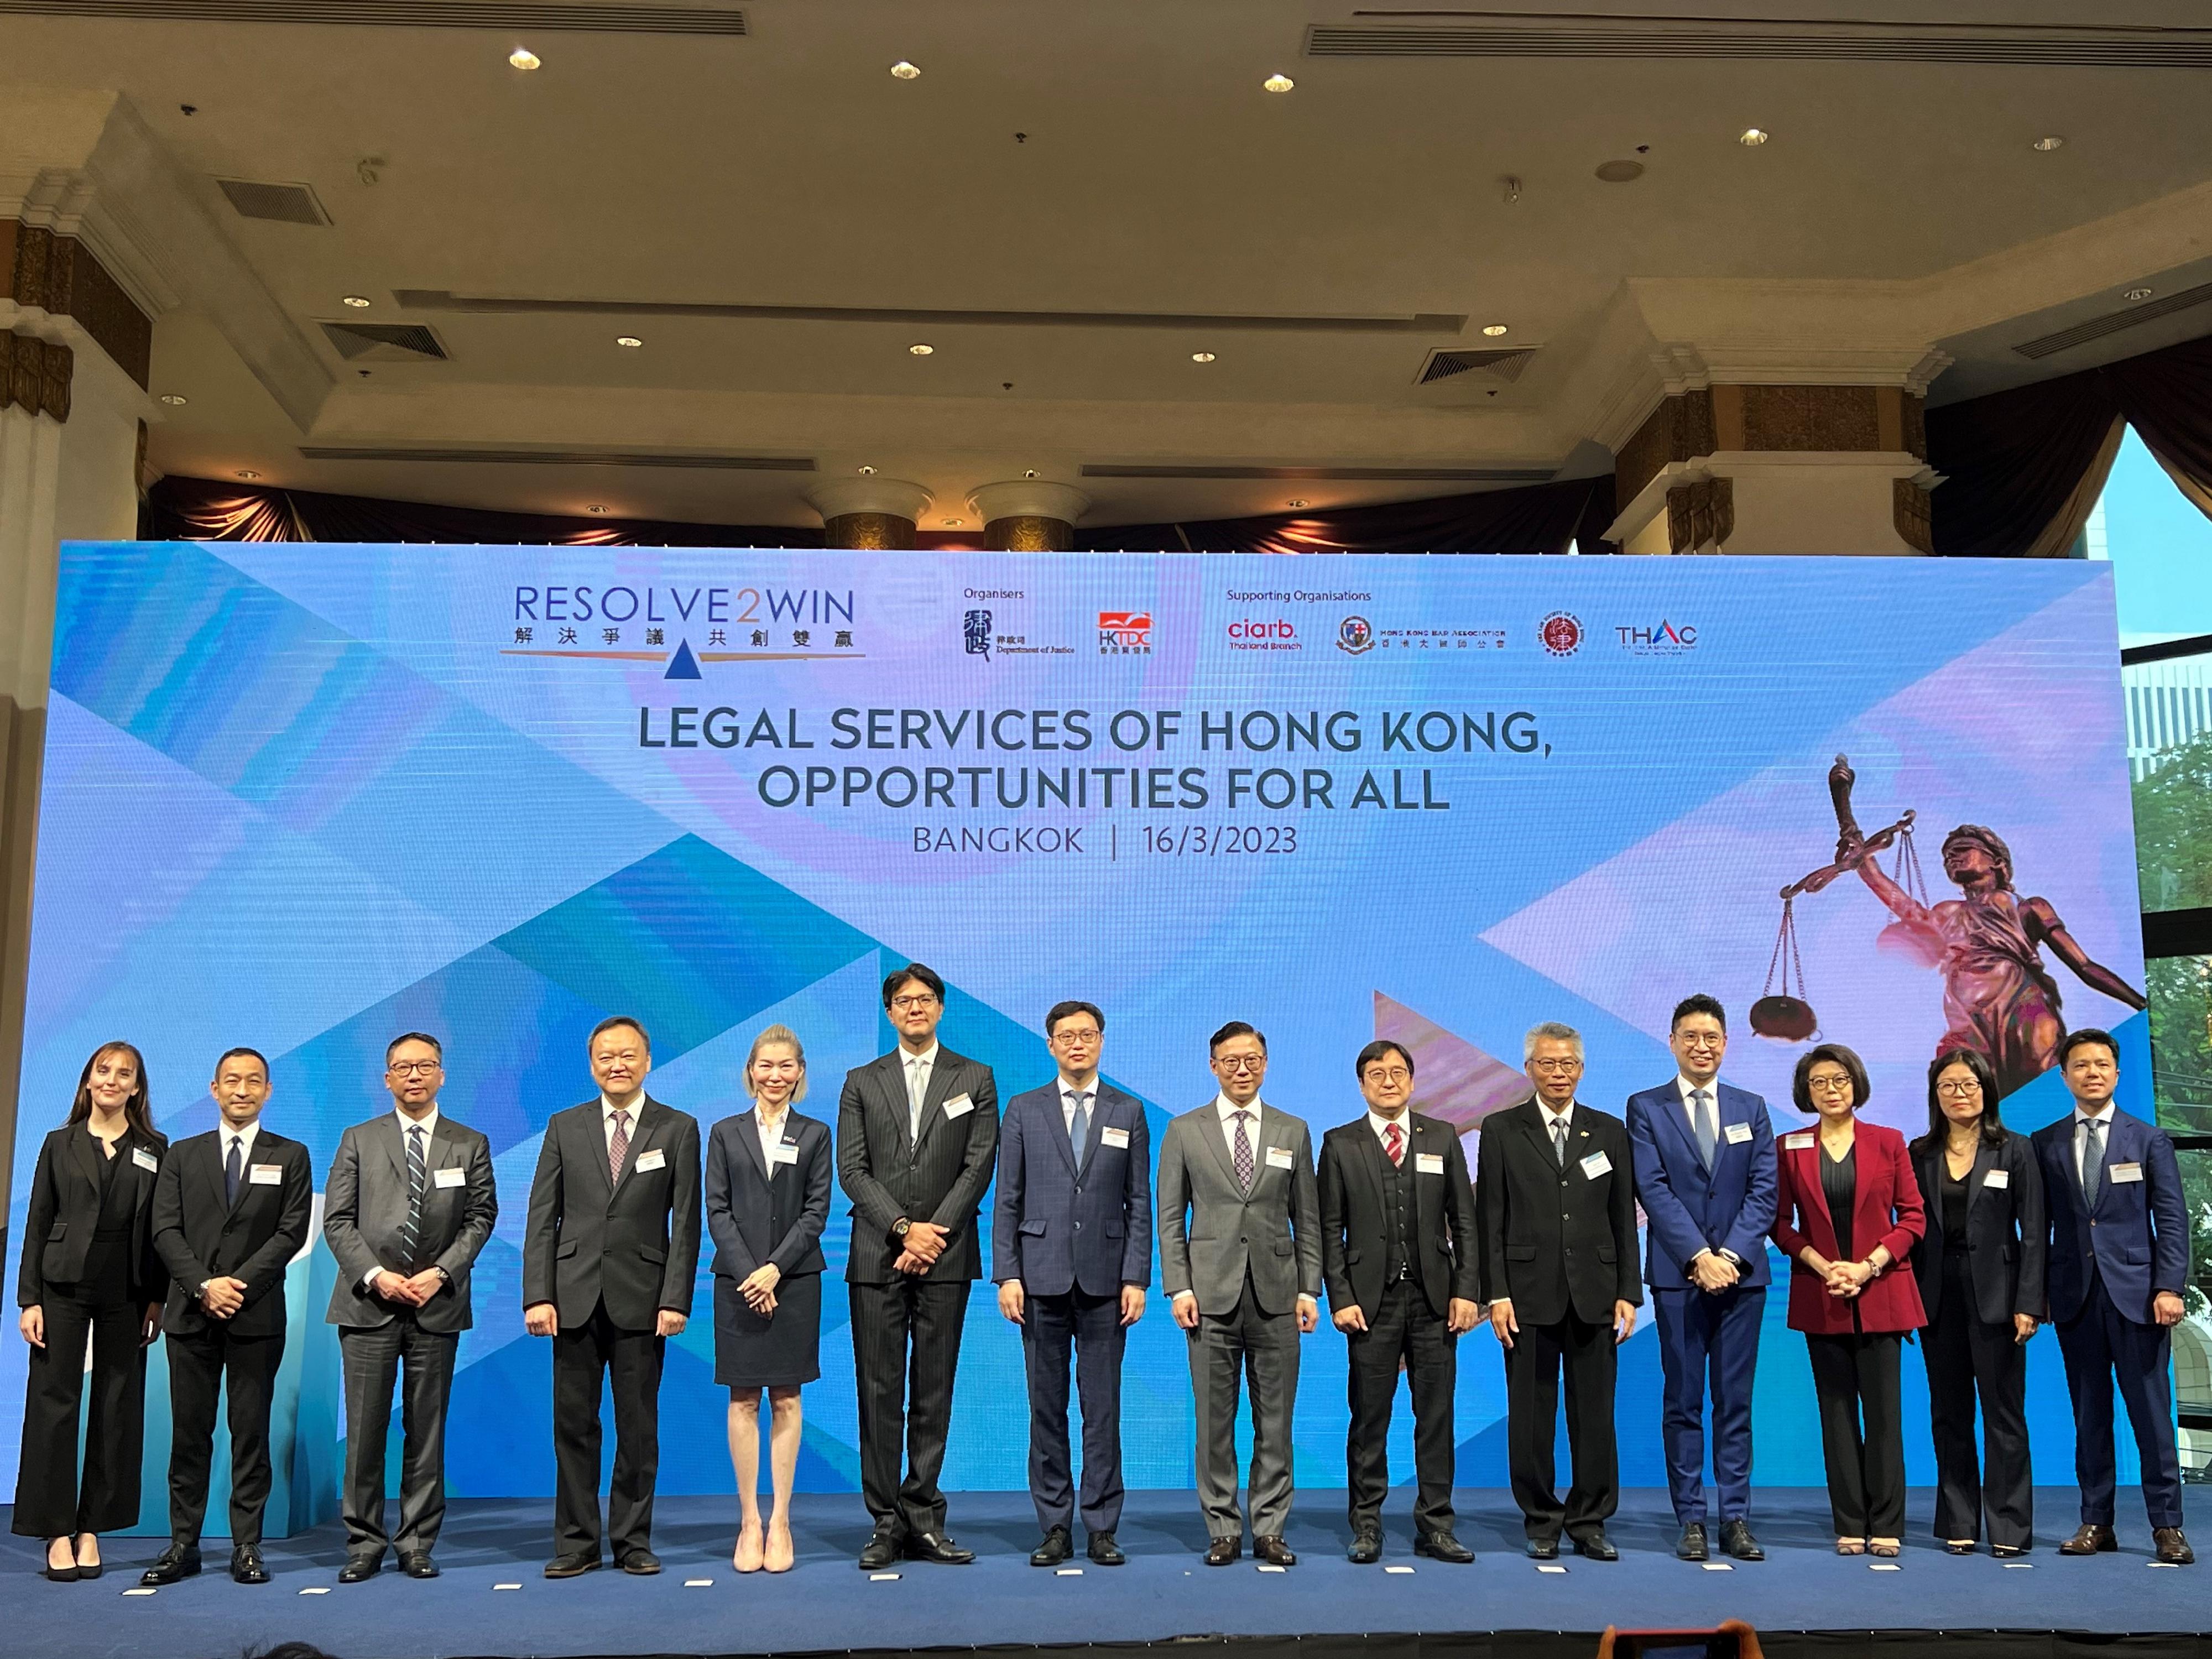 The Deputy Secretary for Justice, Mr Cheung Kwok-kwan, attended the "Resolve2Win - Legal Services of Hong Kong, Opportunities for All", an international promotional campaign co-organised by the Department of Justice and the Hong Kong Trade Development Council (HKTDC), in Bangkok, Thailand, today (March 16). Photo shows Mr Cheung (seventh right) with the speakers and representatives from the HKTDC and supporting organisations at the event.
 
